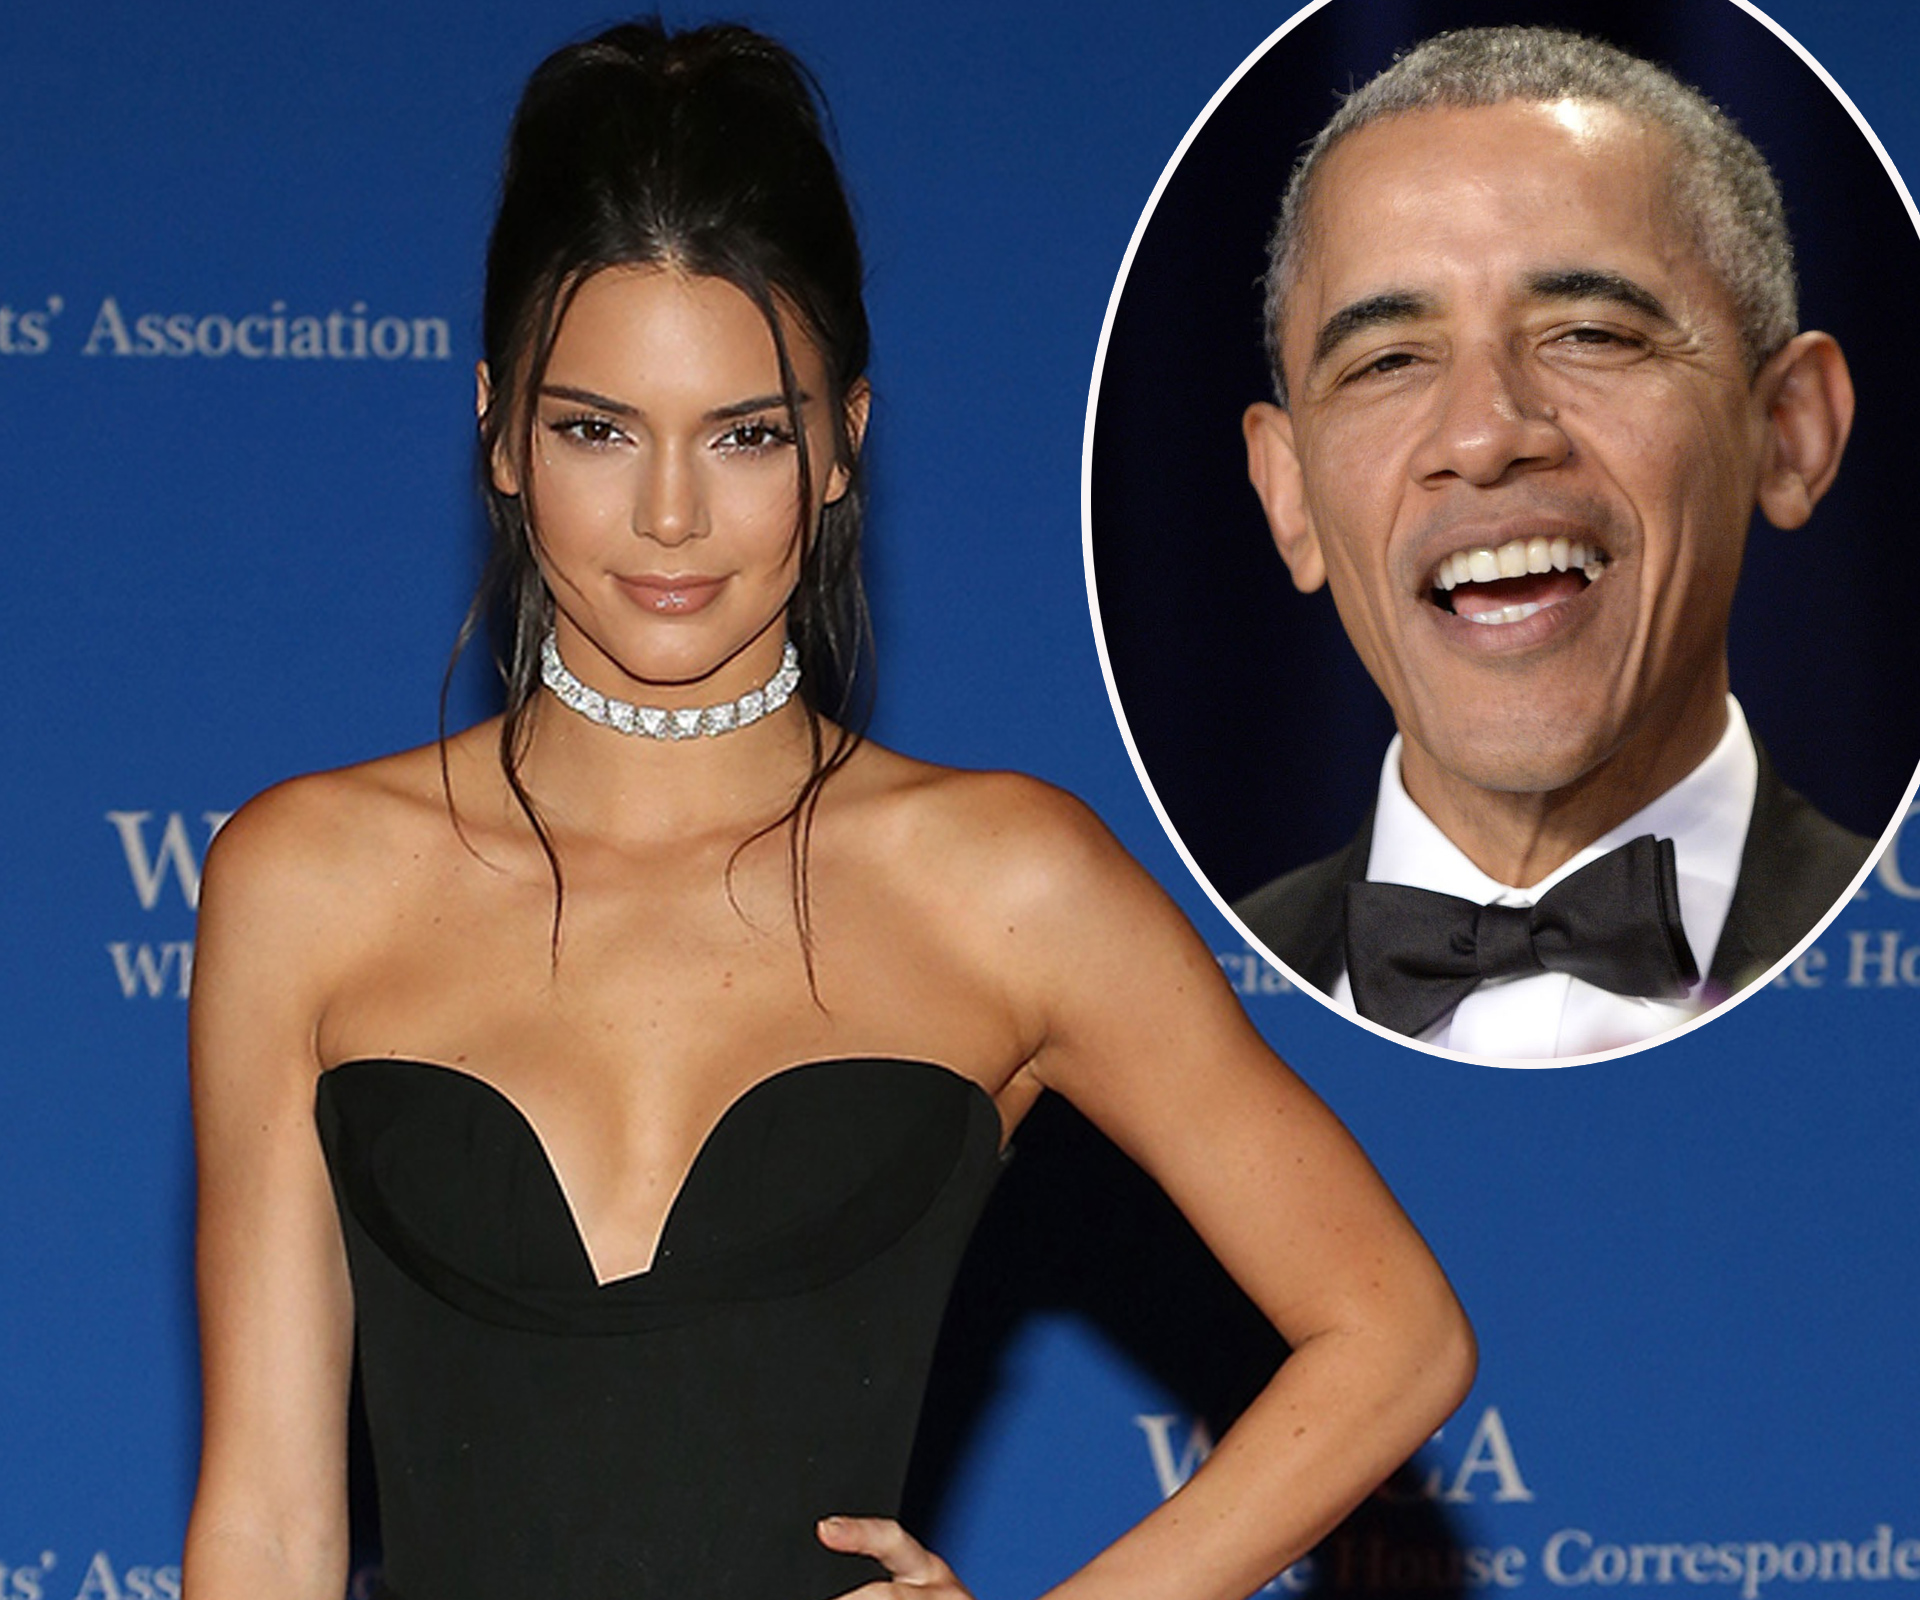 Obama and Kendall Jenner